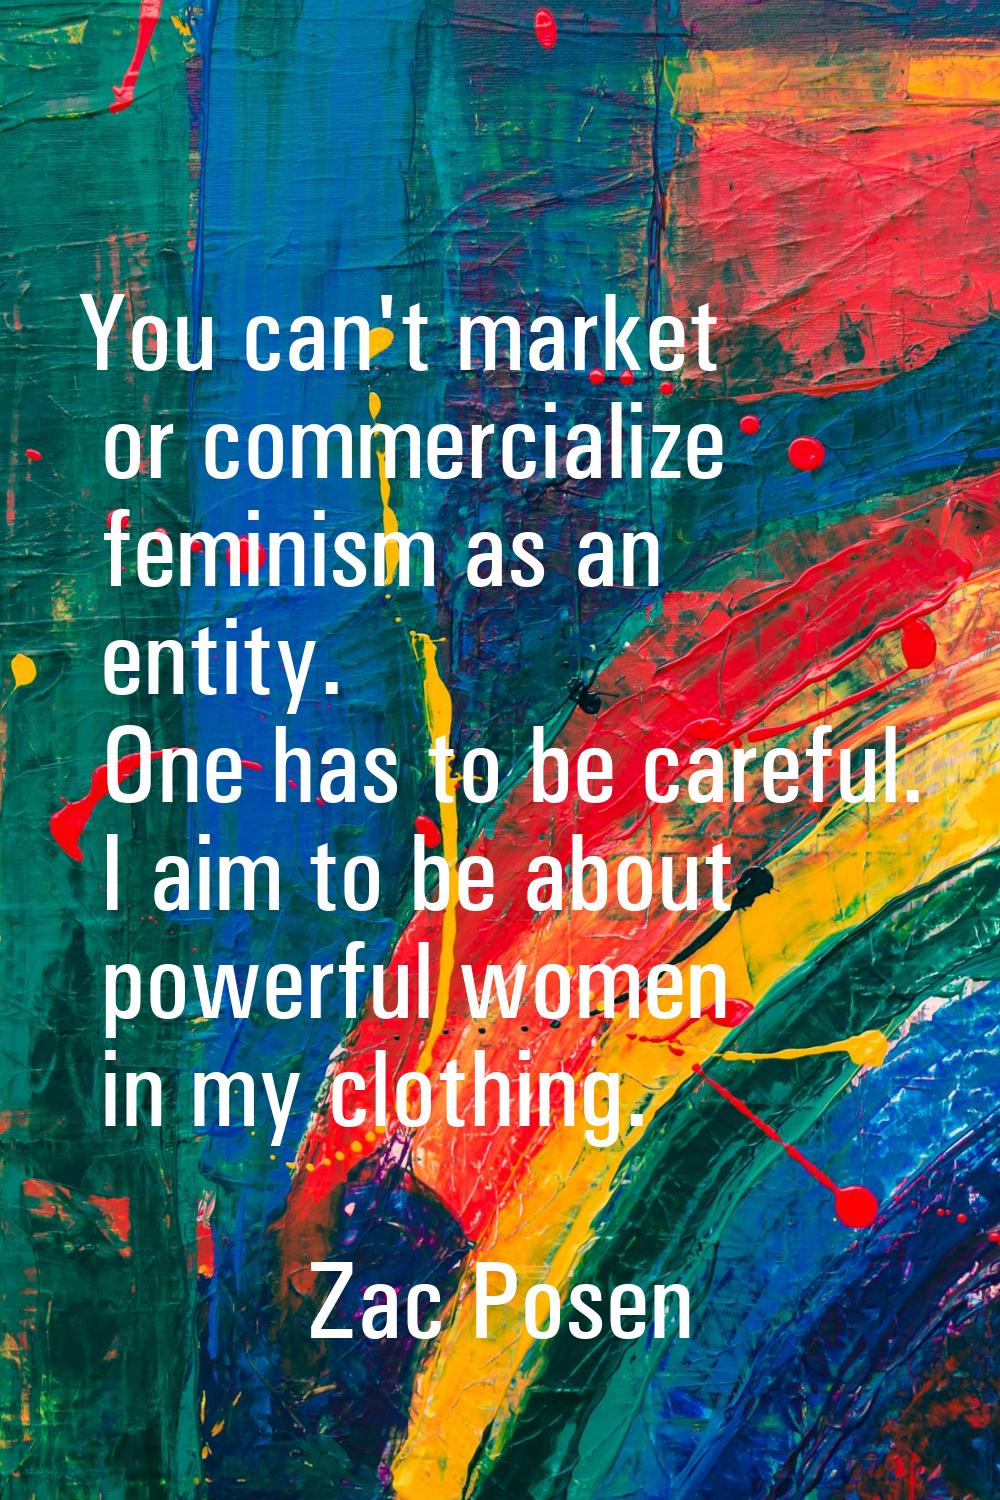 You can't market or commercialize feminism as an entity. One has to be careful. I aim to be about p